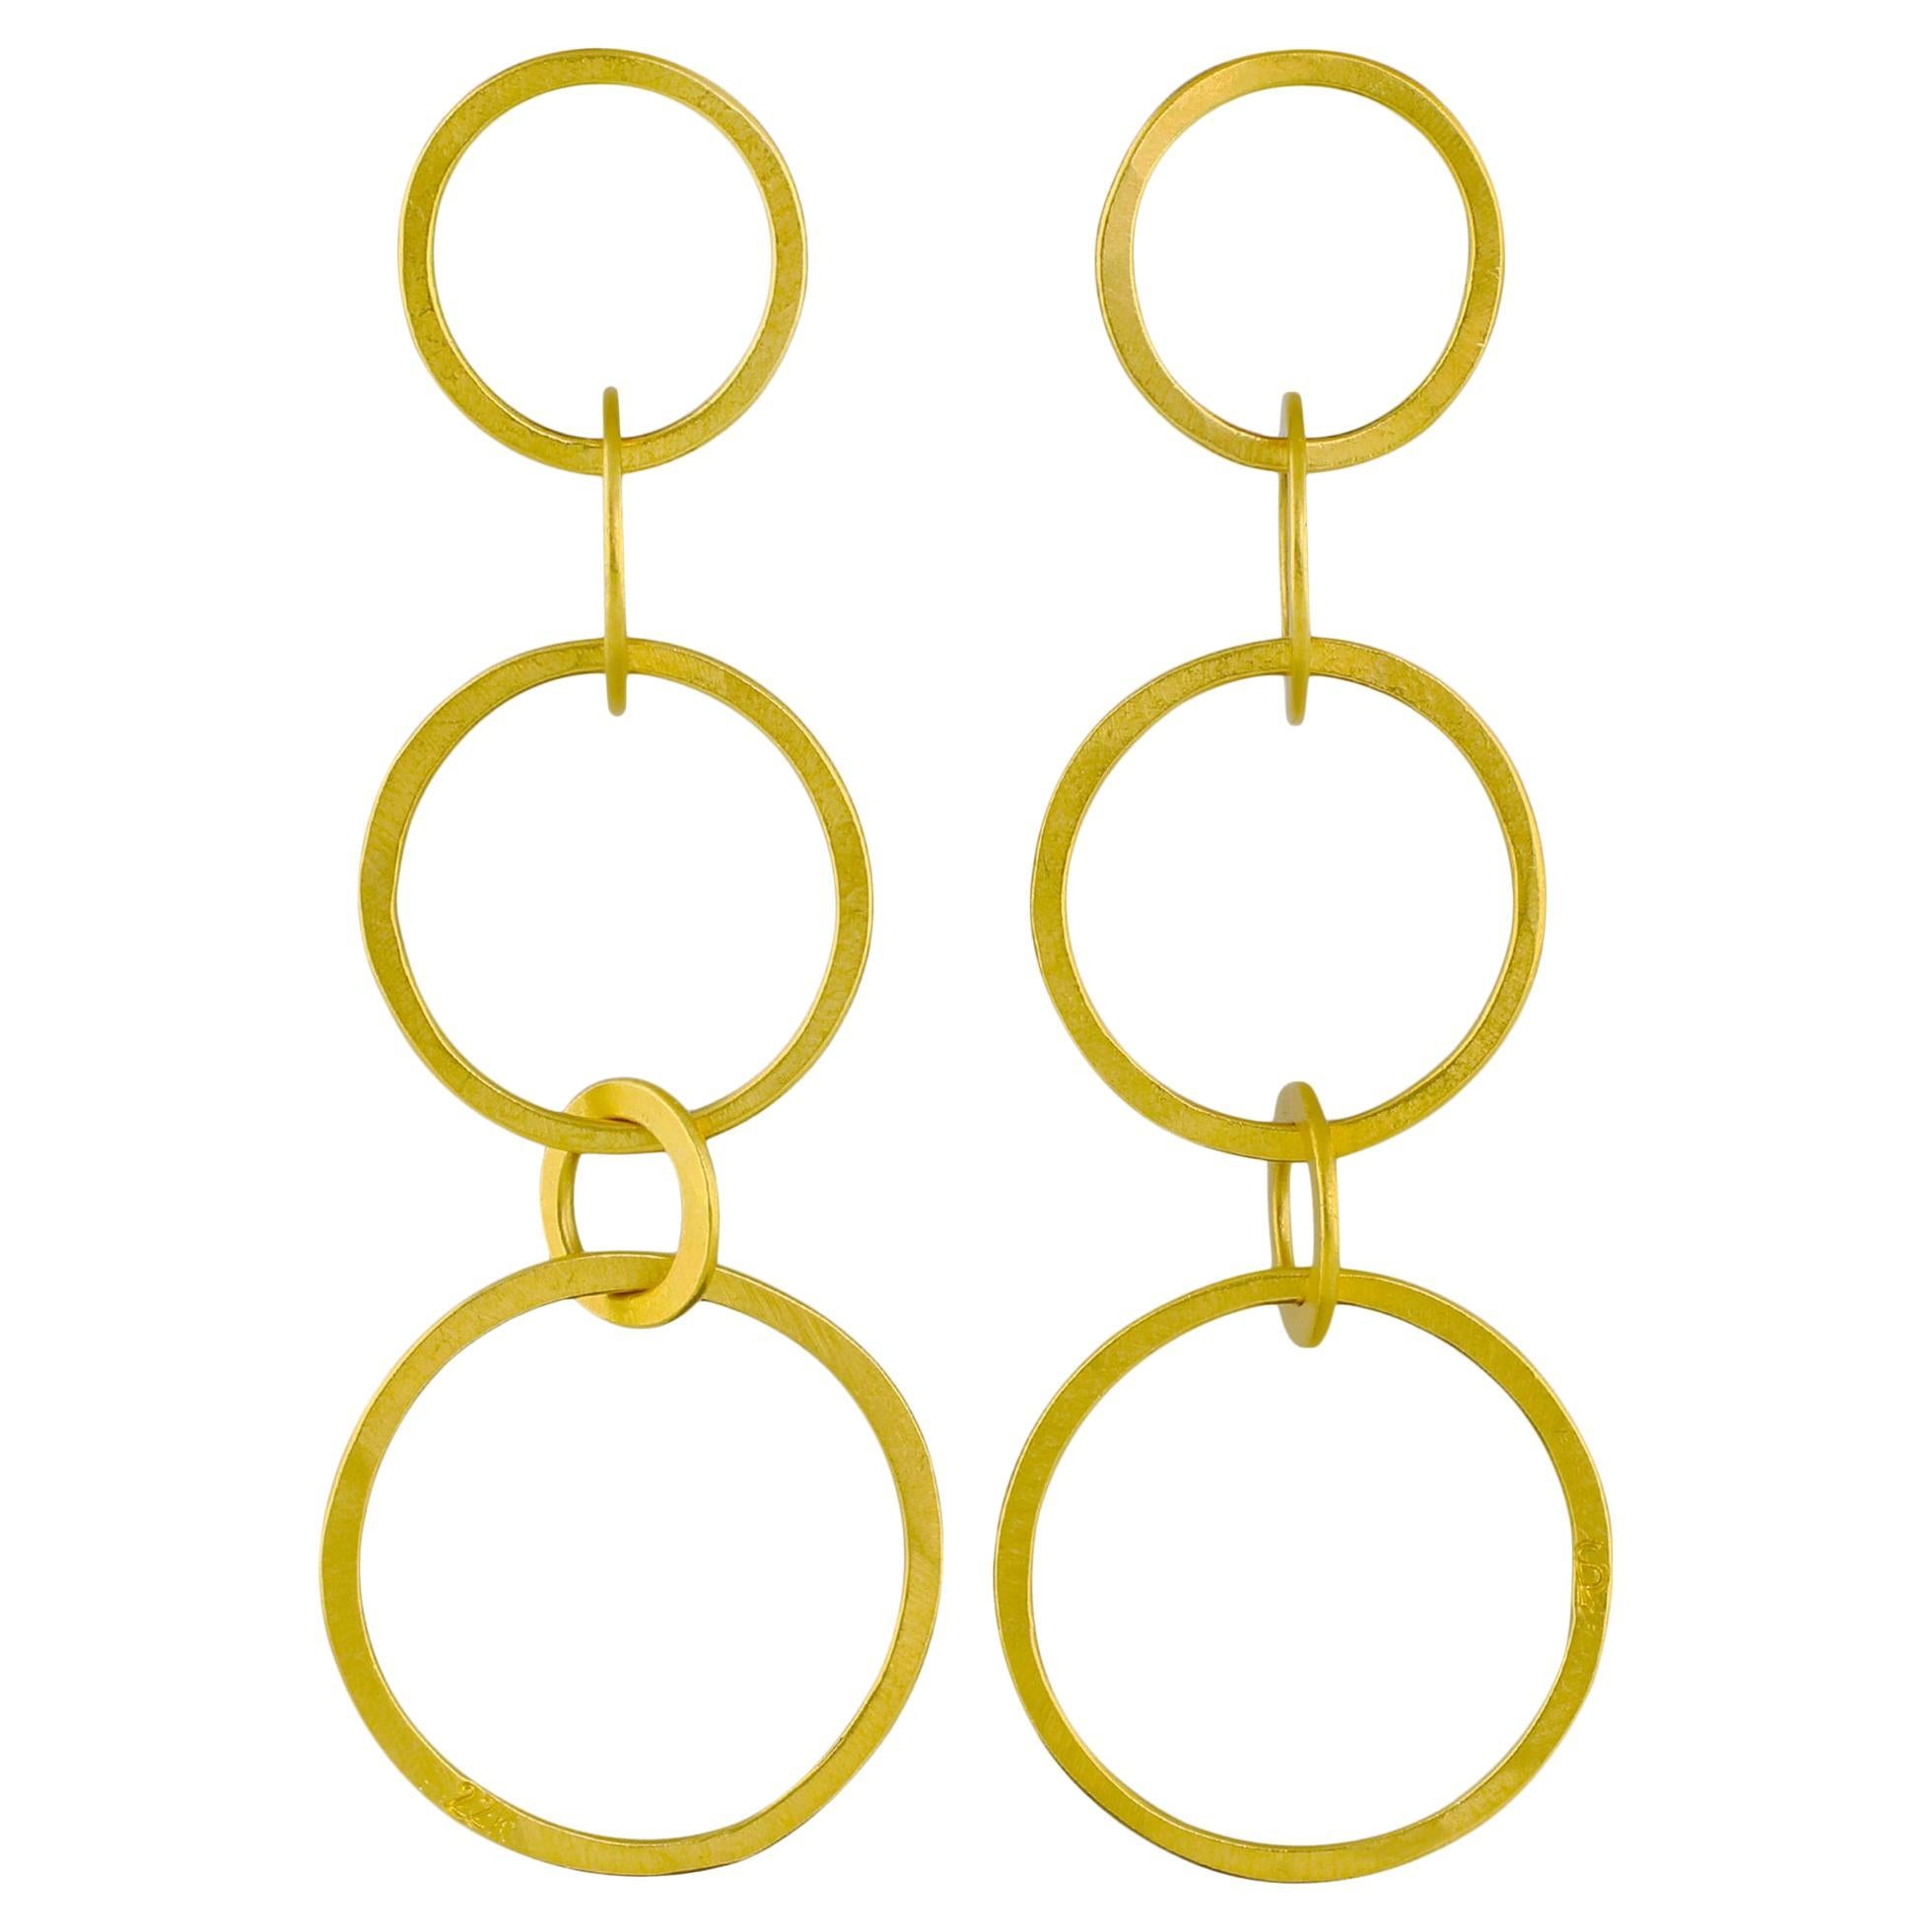 PHILIPPE SPENCER Solid 22K Gold 5-Hoop Hand-Forged Dangling Earrings